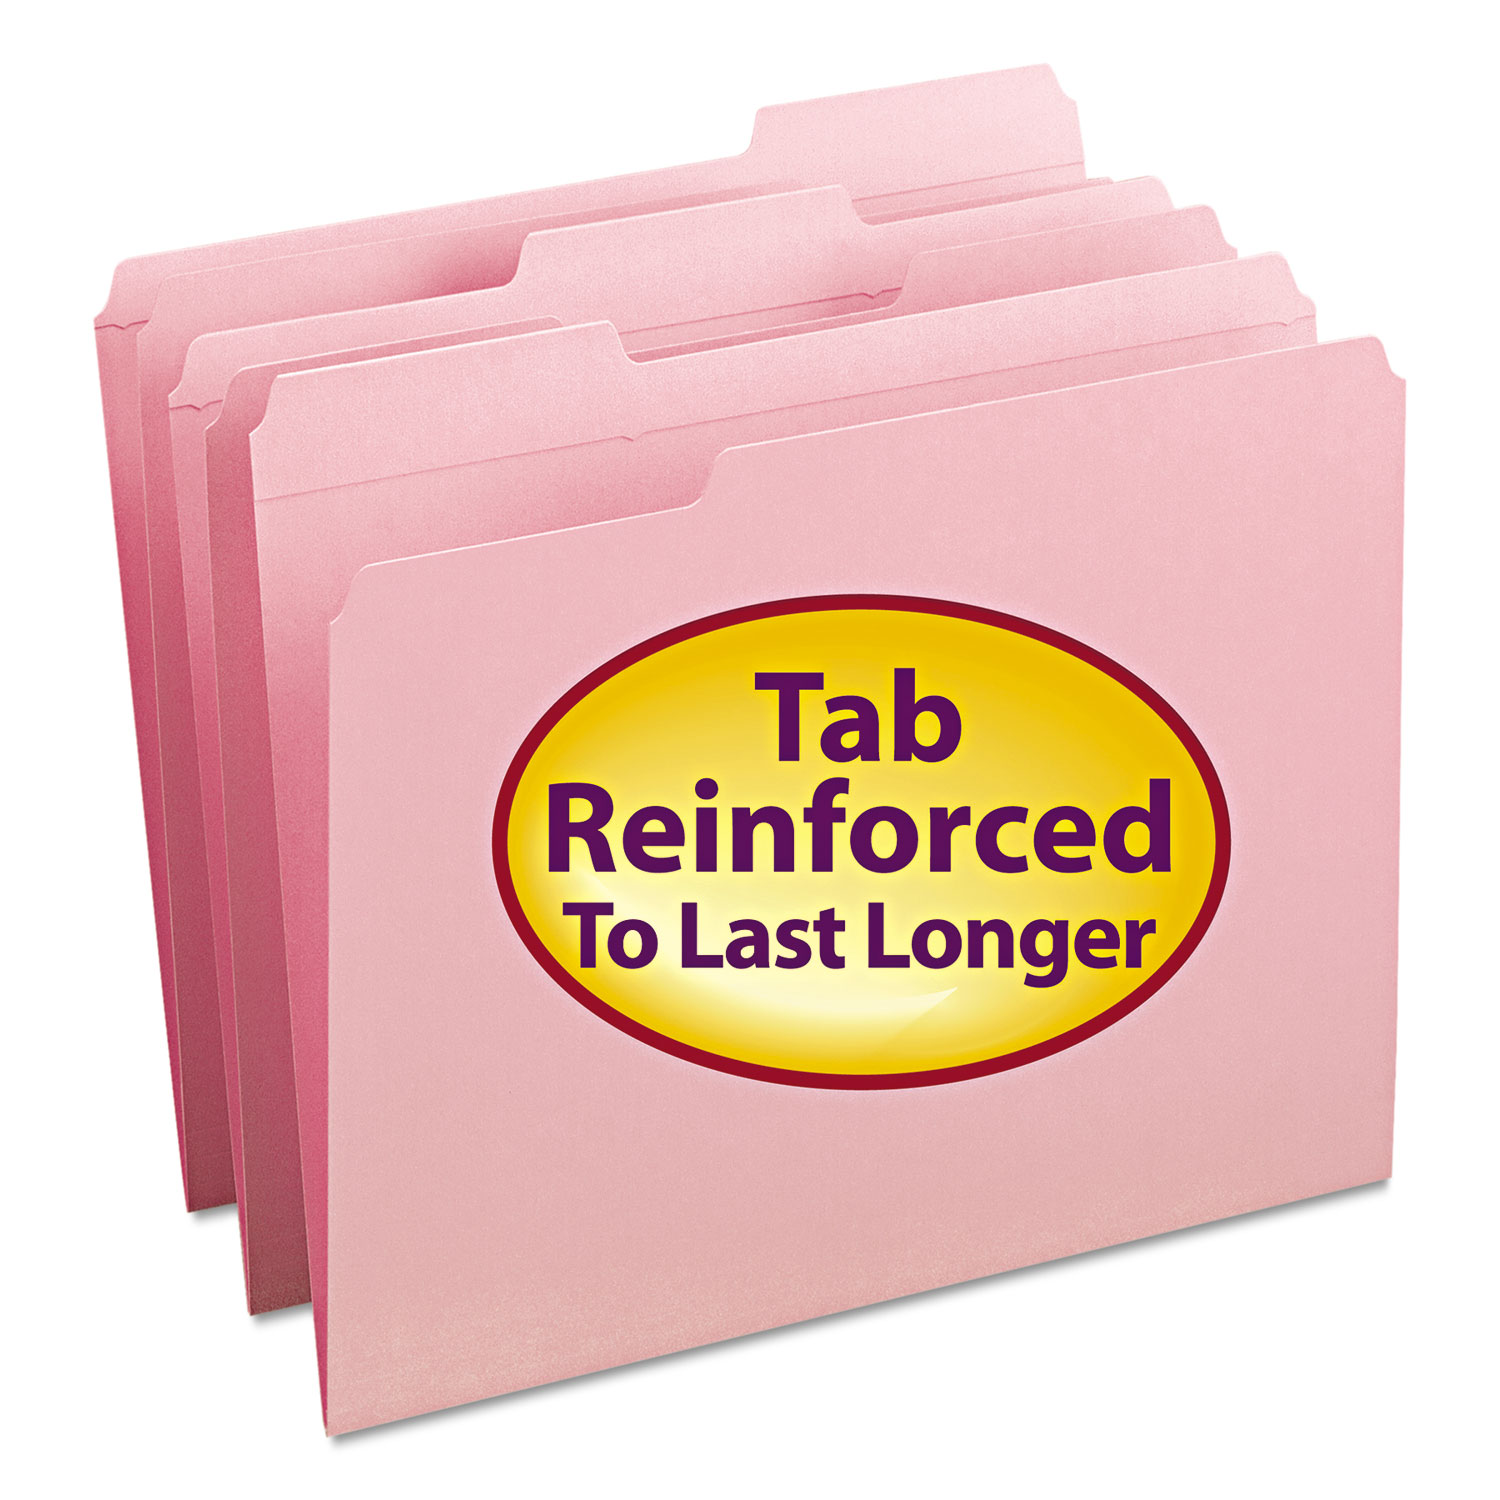  Smead 12634 Reinforced Top Tab Colored File Folders, 1/3-Cut Tabs, Letter Size, Pink, 100/Box (SMD12634) 